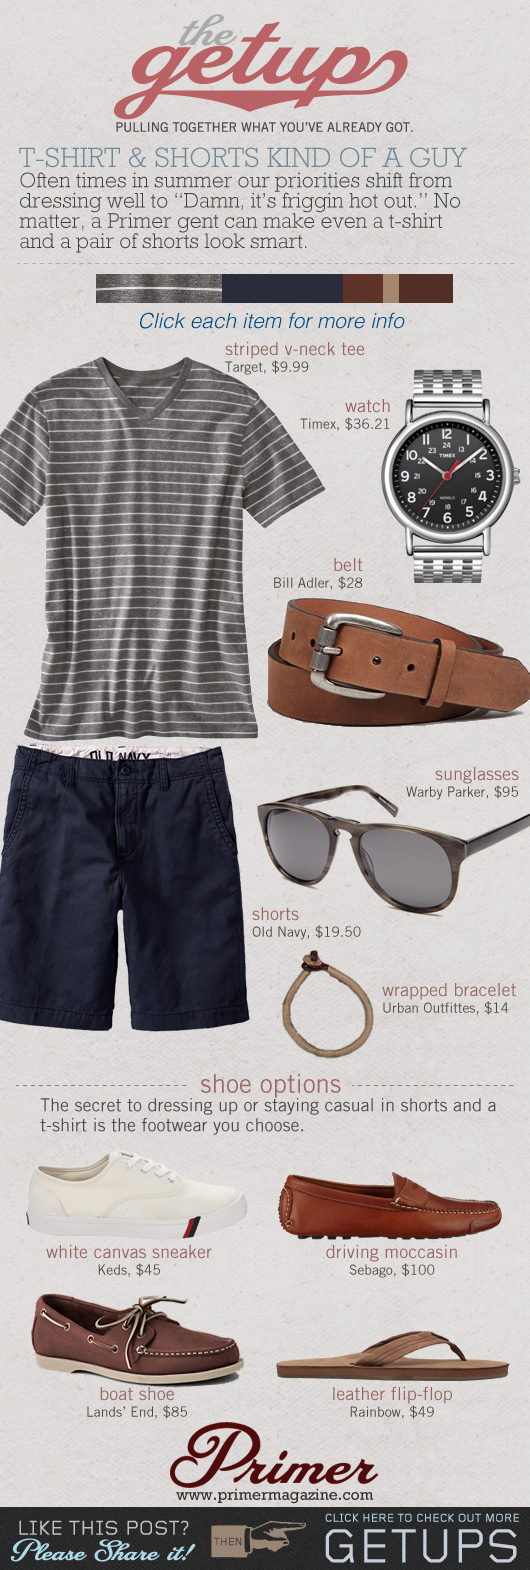 The Getup collage gray Tshirt and blue Shorts - with 3 shoe options